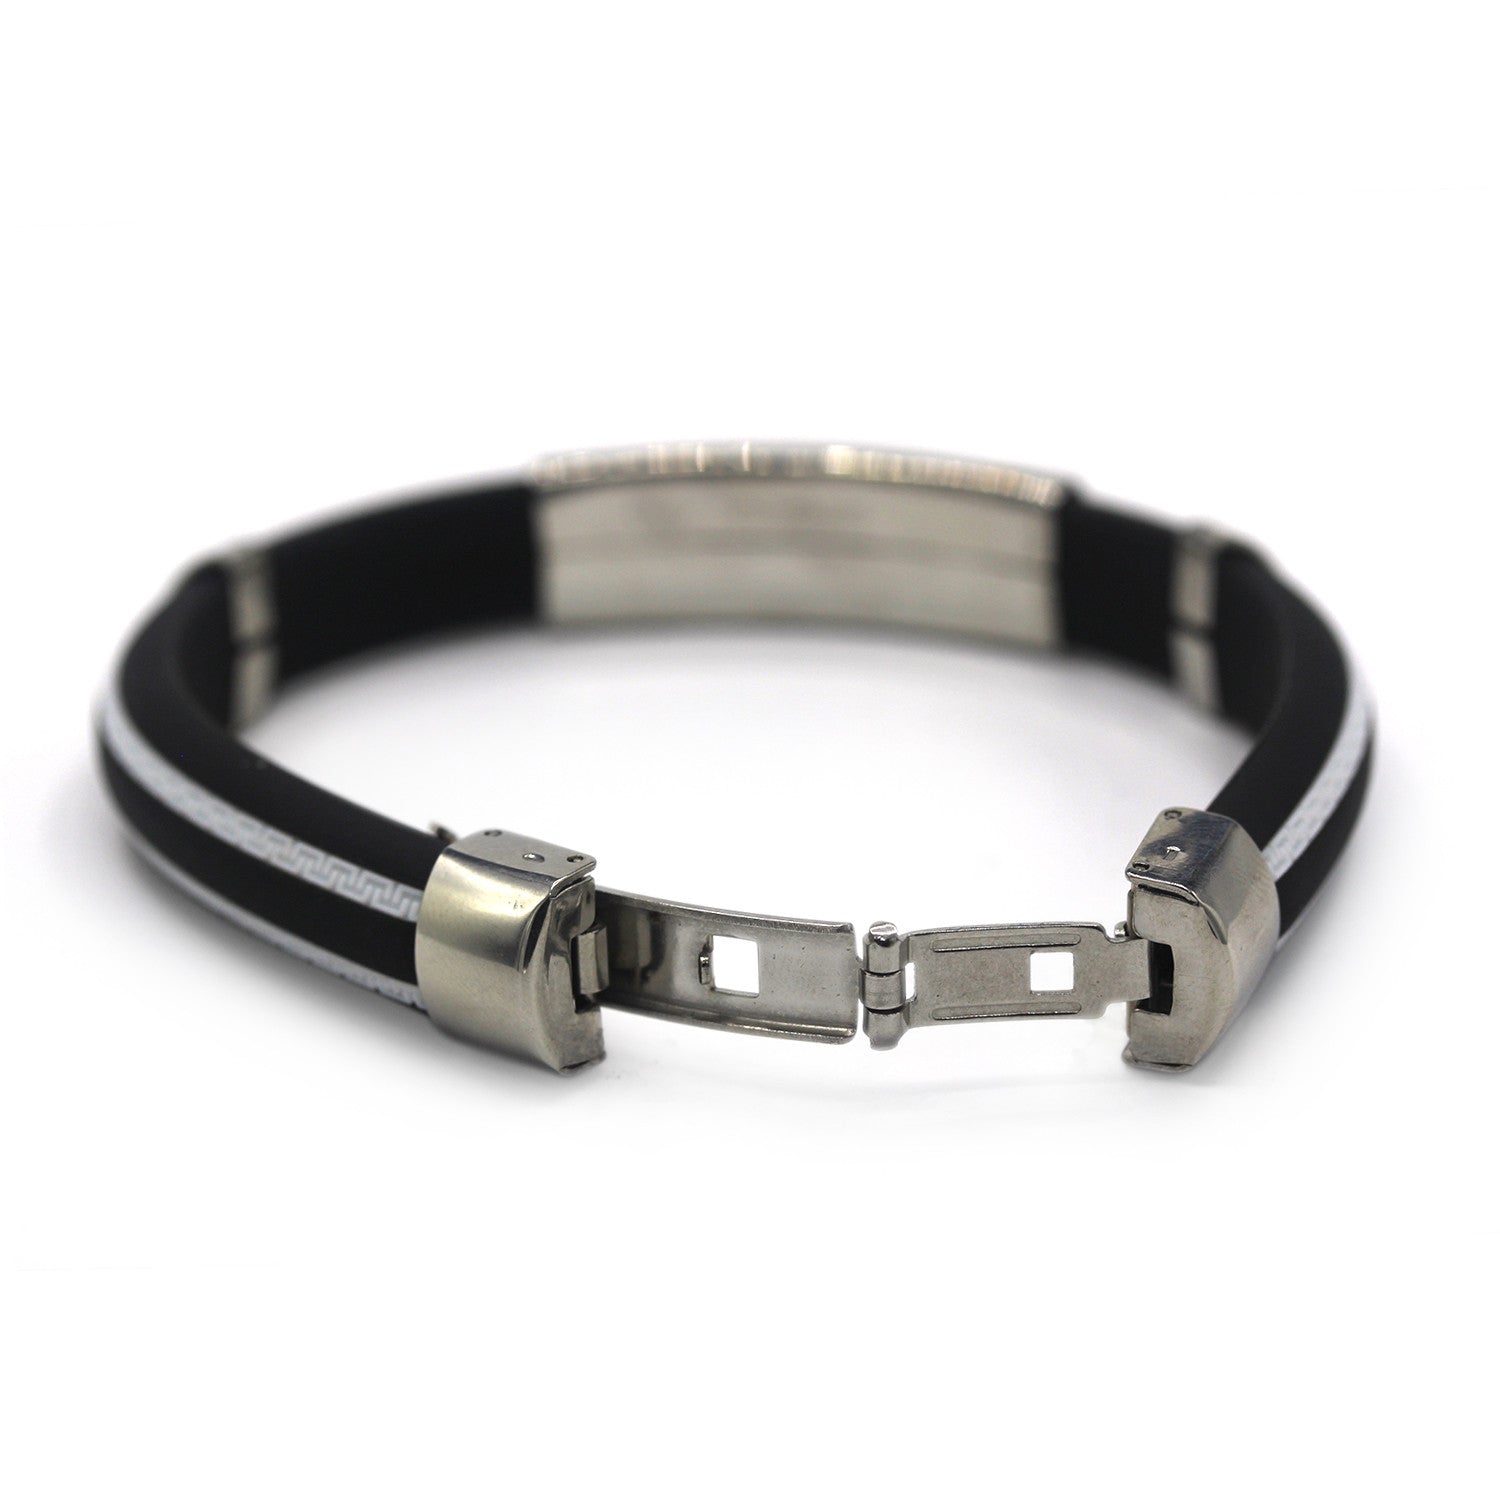 Designer Rubber Bracelet Stainless Steel Accents Dual Hinge Clasp (Silver)